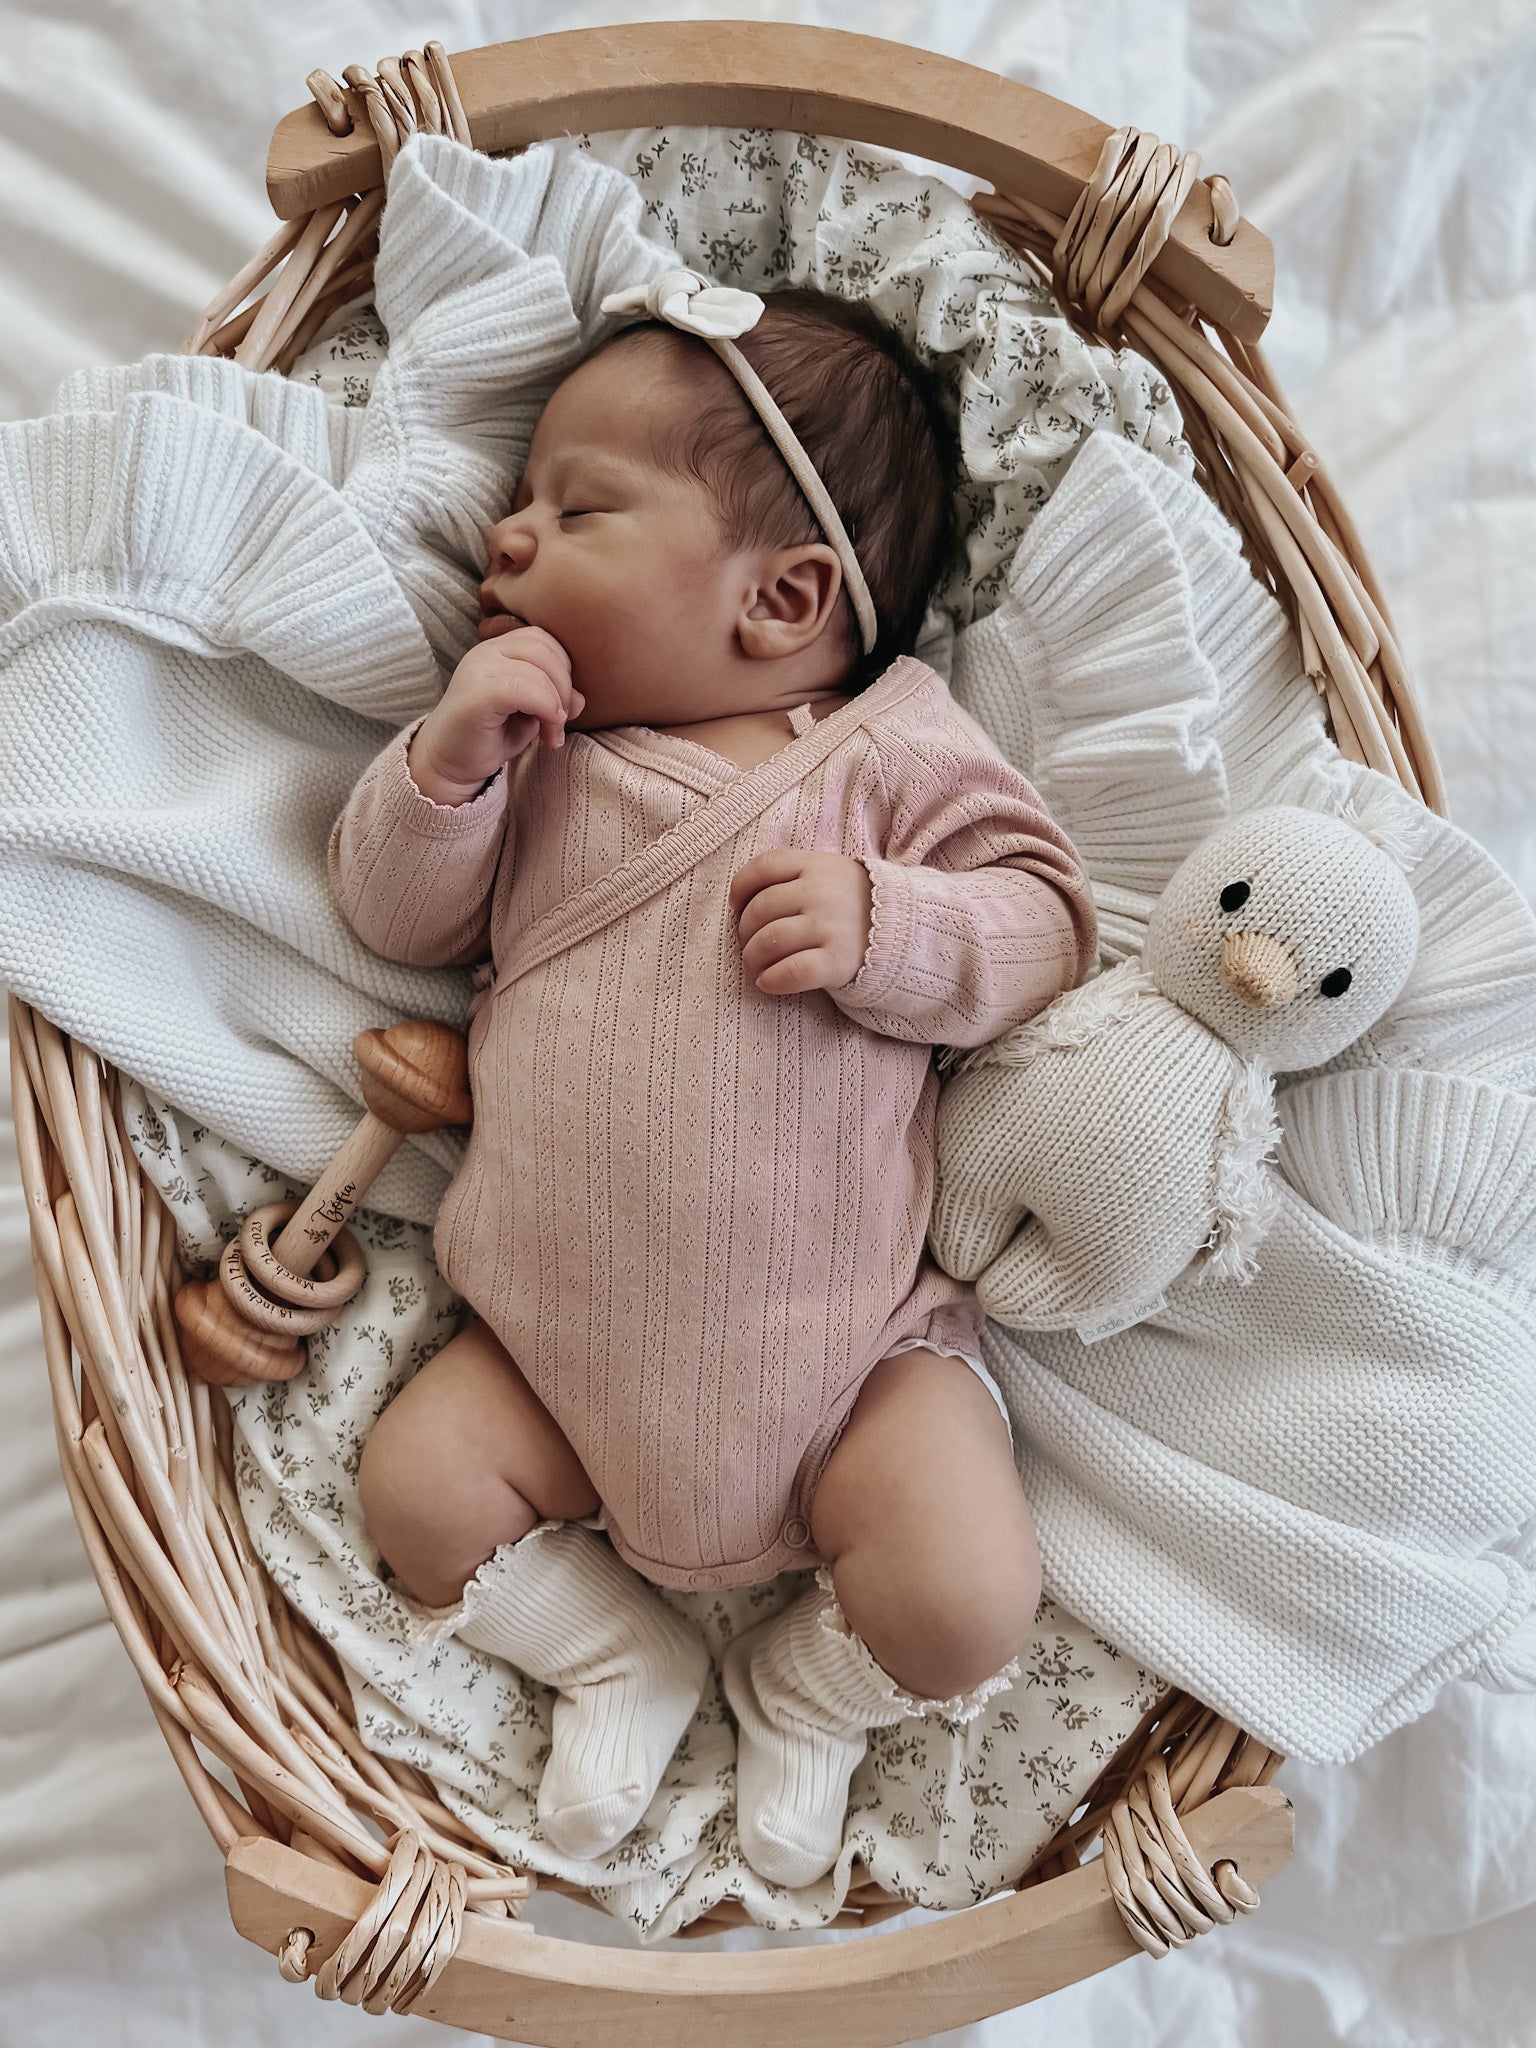 Our rattles are made with care and attention to detail, this rattle is perfect for newborns and young babies to hold and play with, and can even be passed down as a family heirloom. 